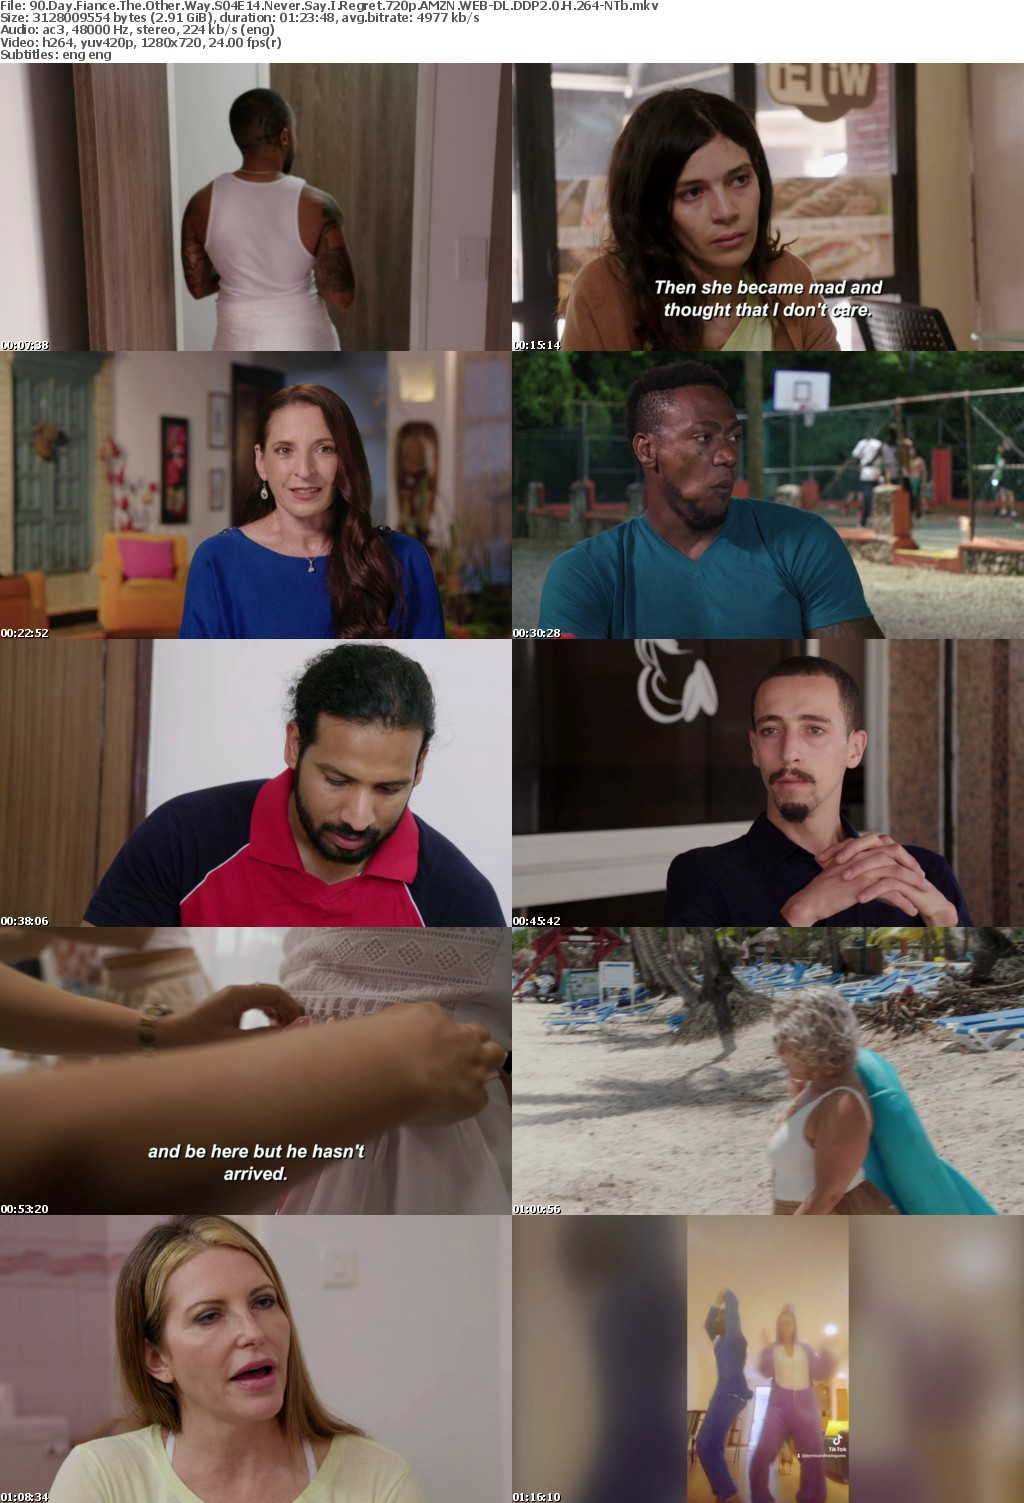 90 Day Fiance The Other Way S04E14 Never Say I Regret 720p AMZN WEBRip DDP2 0 x264-NTb